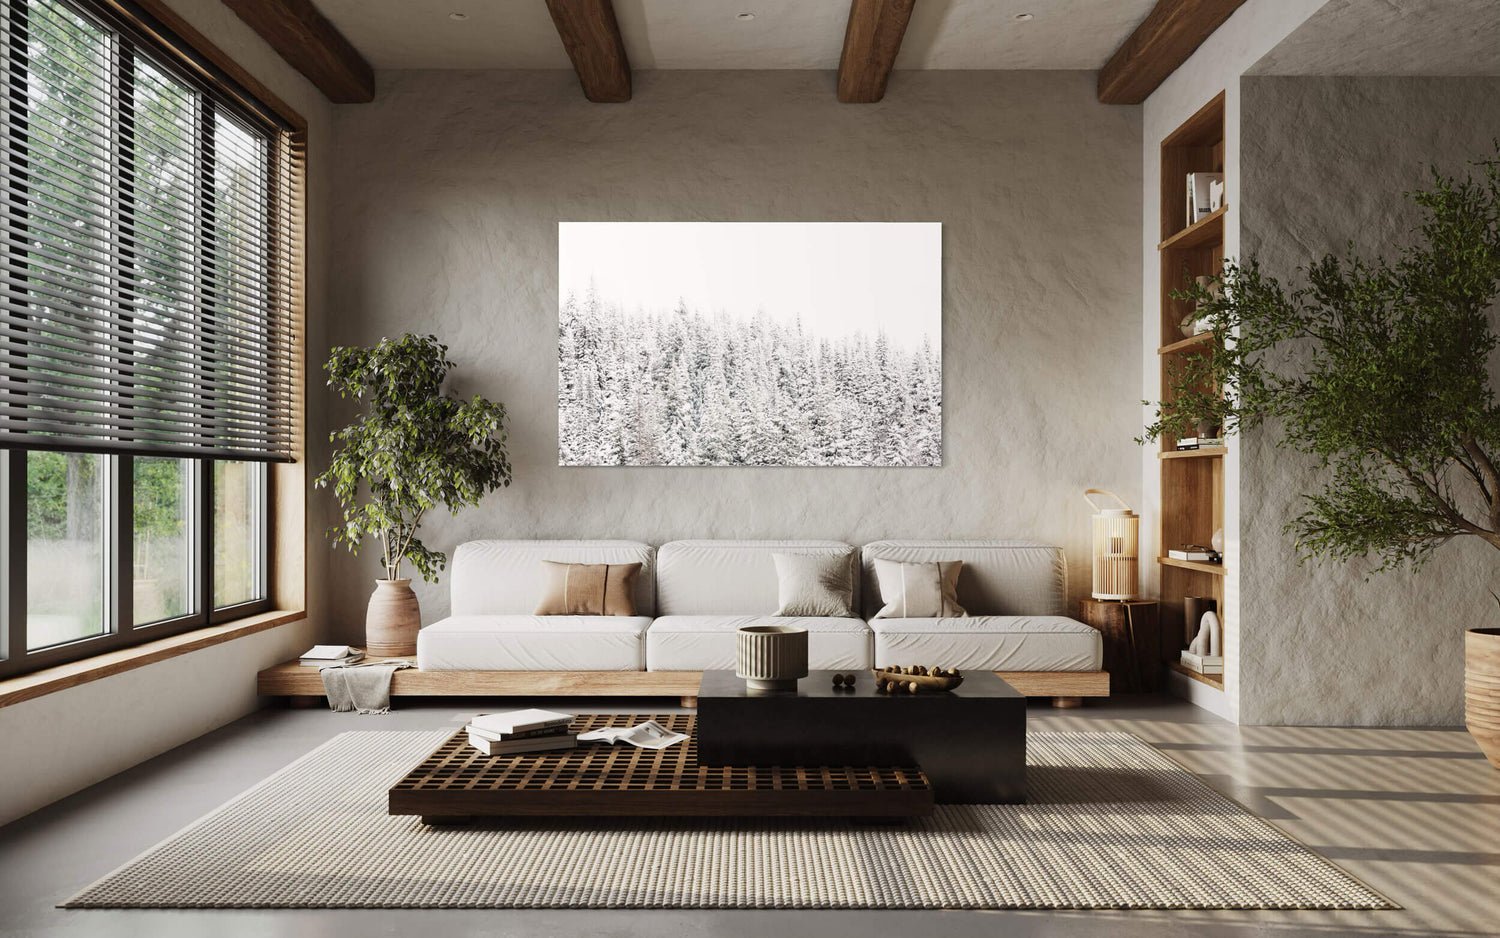 A piece of Steamboat Springs art showing snowy trees hangs in a living room.